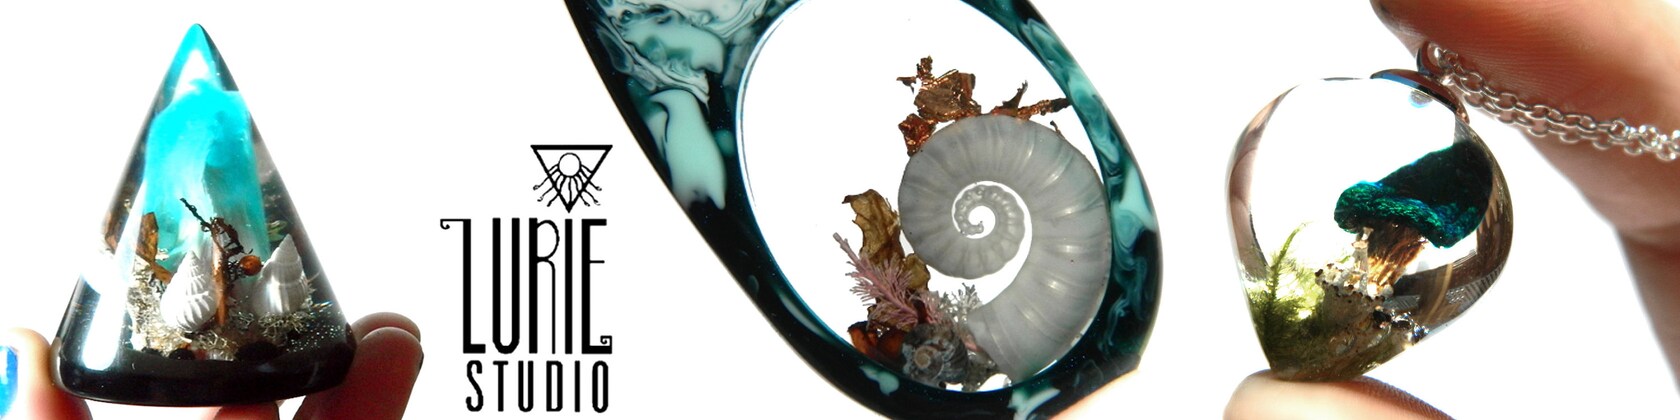 Resin Jewelry Inspired By Nature by LurieStudio on Etsy